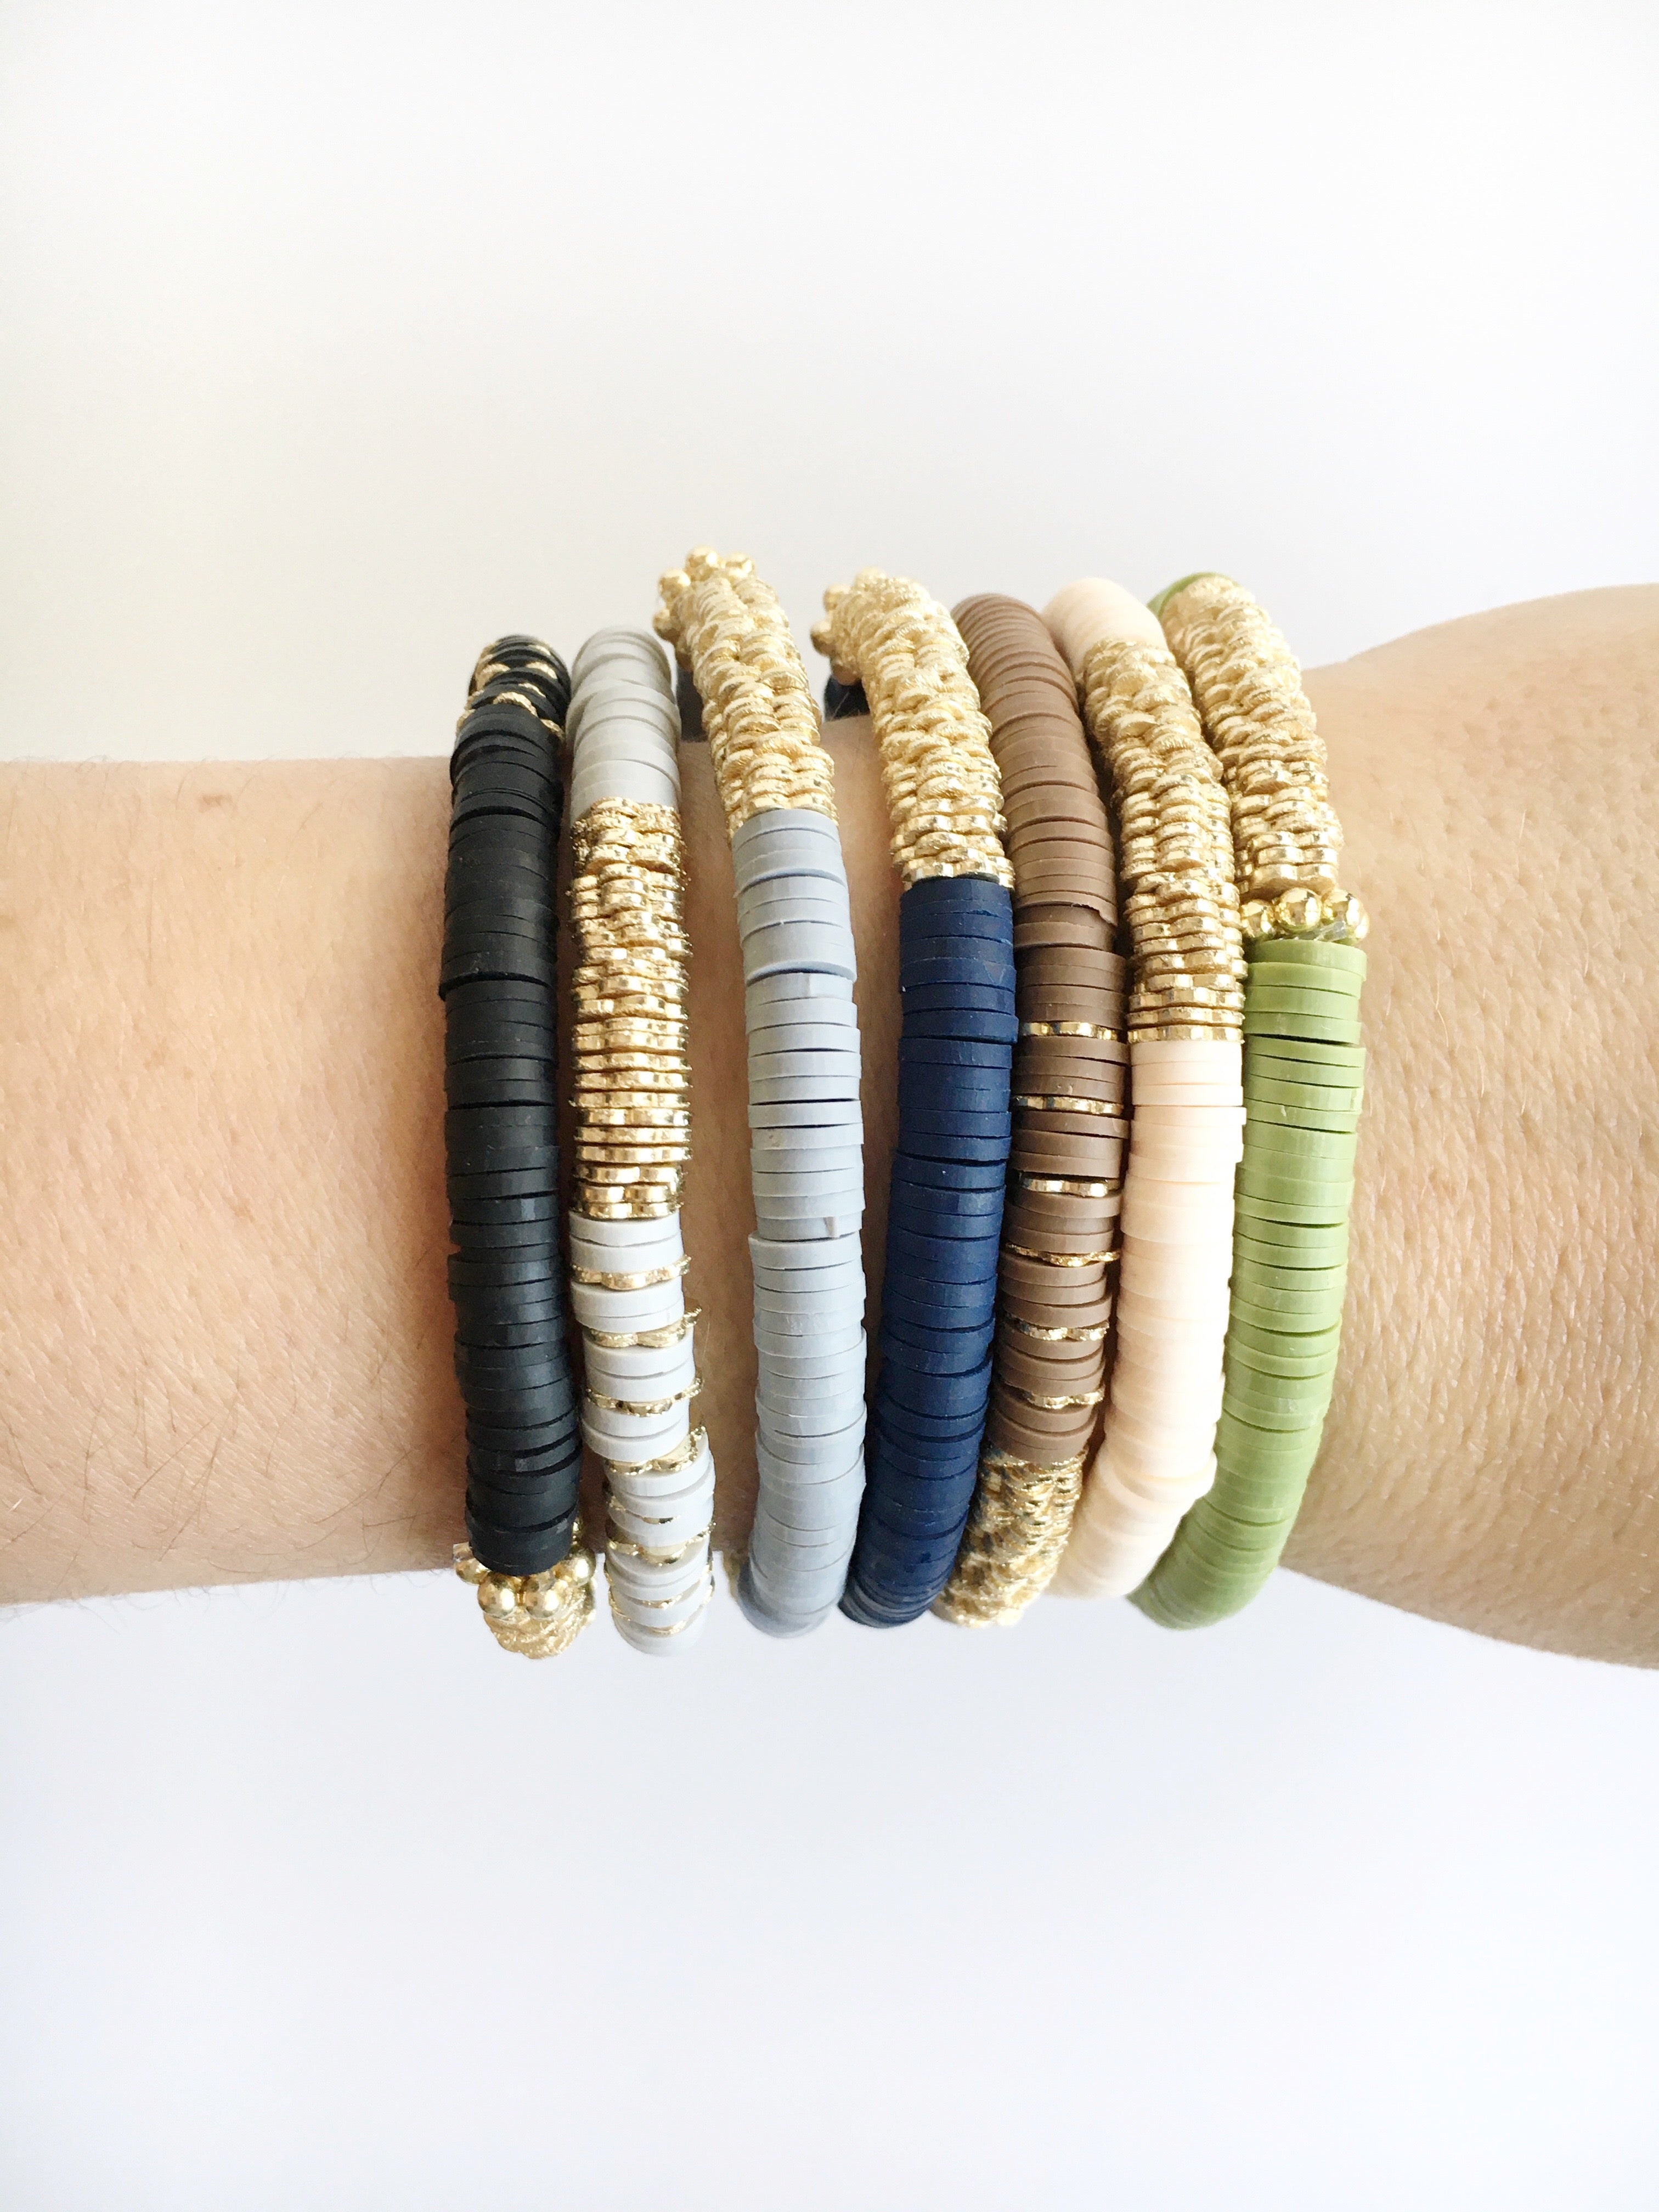 Women's wrist wearing Top view of stretch beaded bracelets in Black, Light gray, dark gray, navy blue, brown, vanilla, and olive.